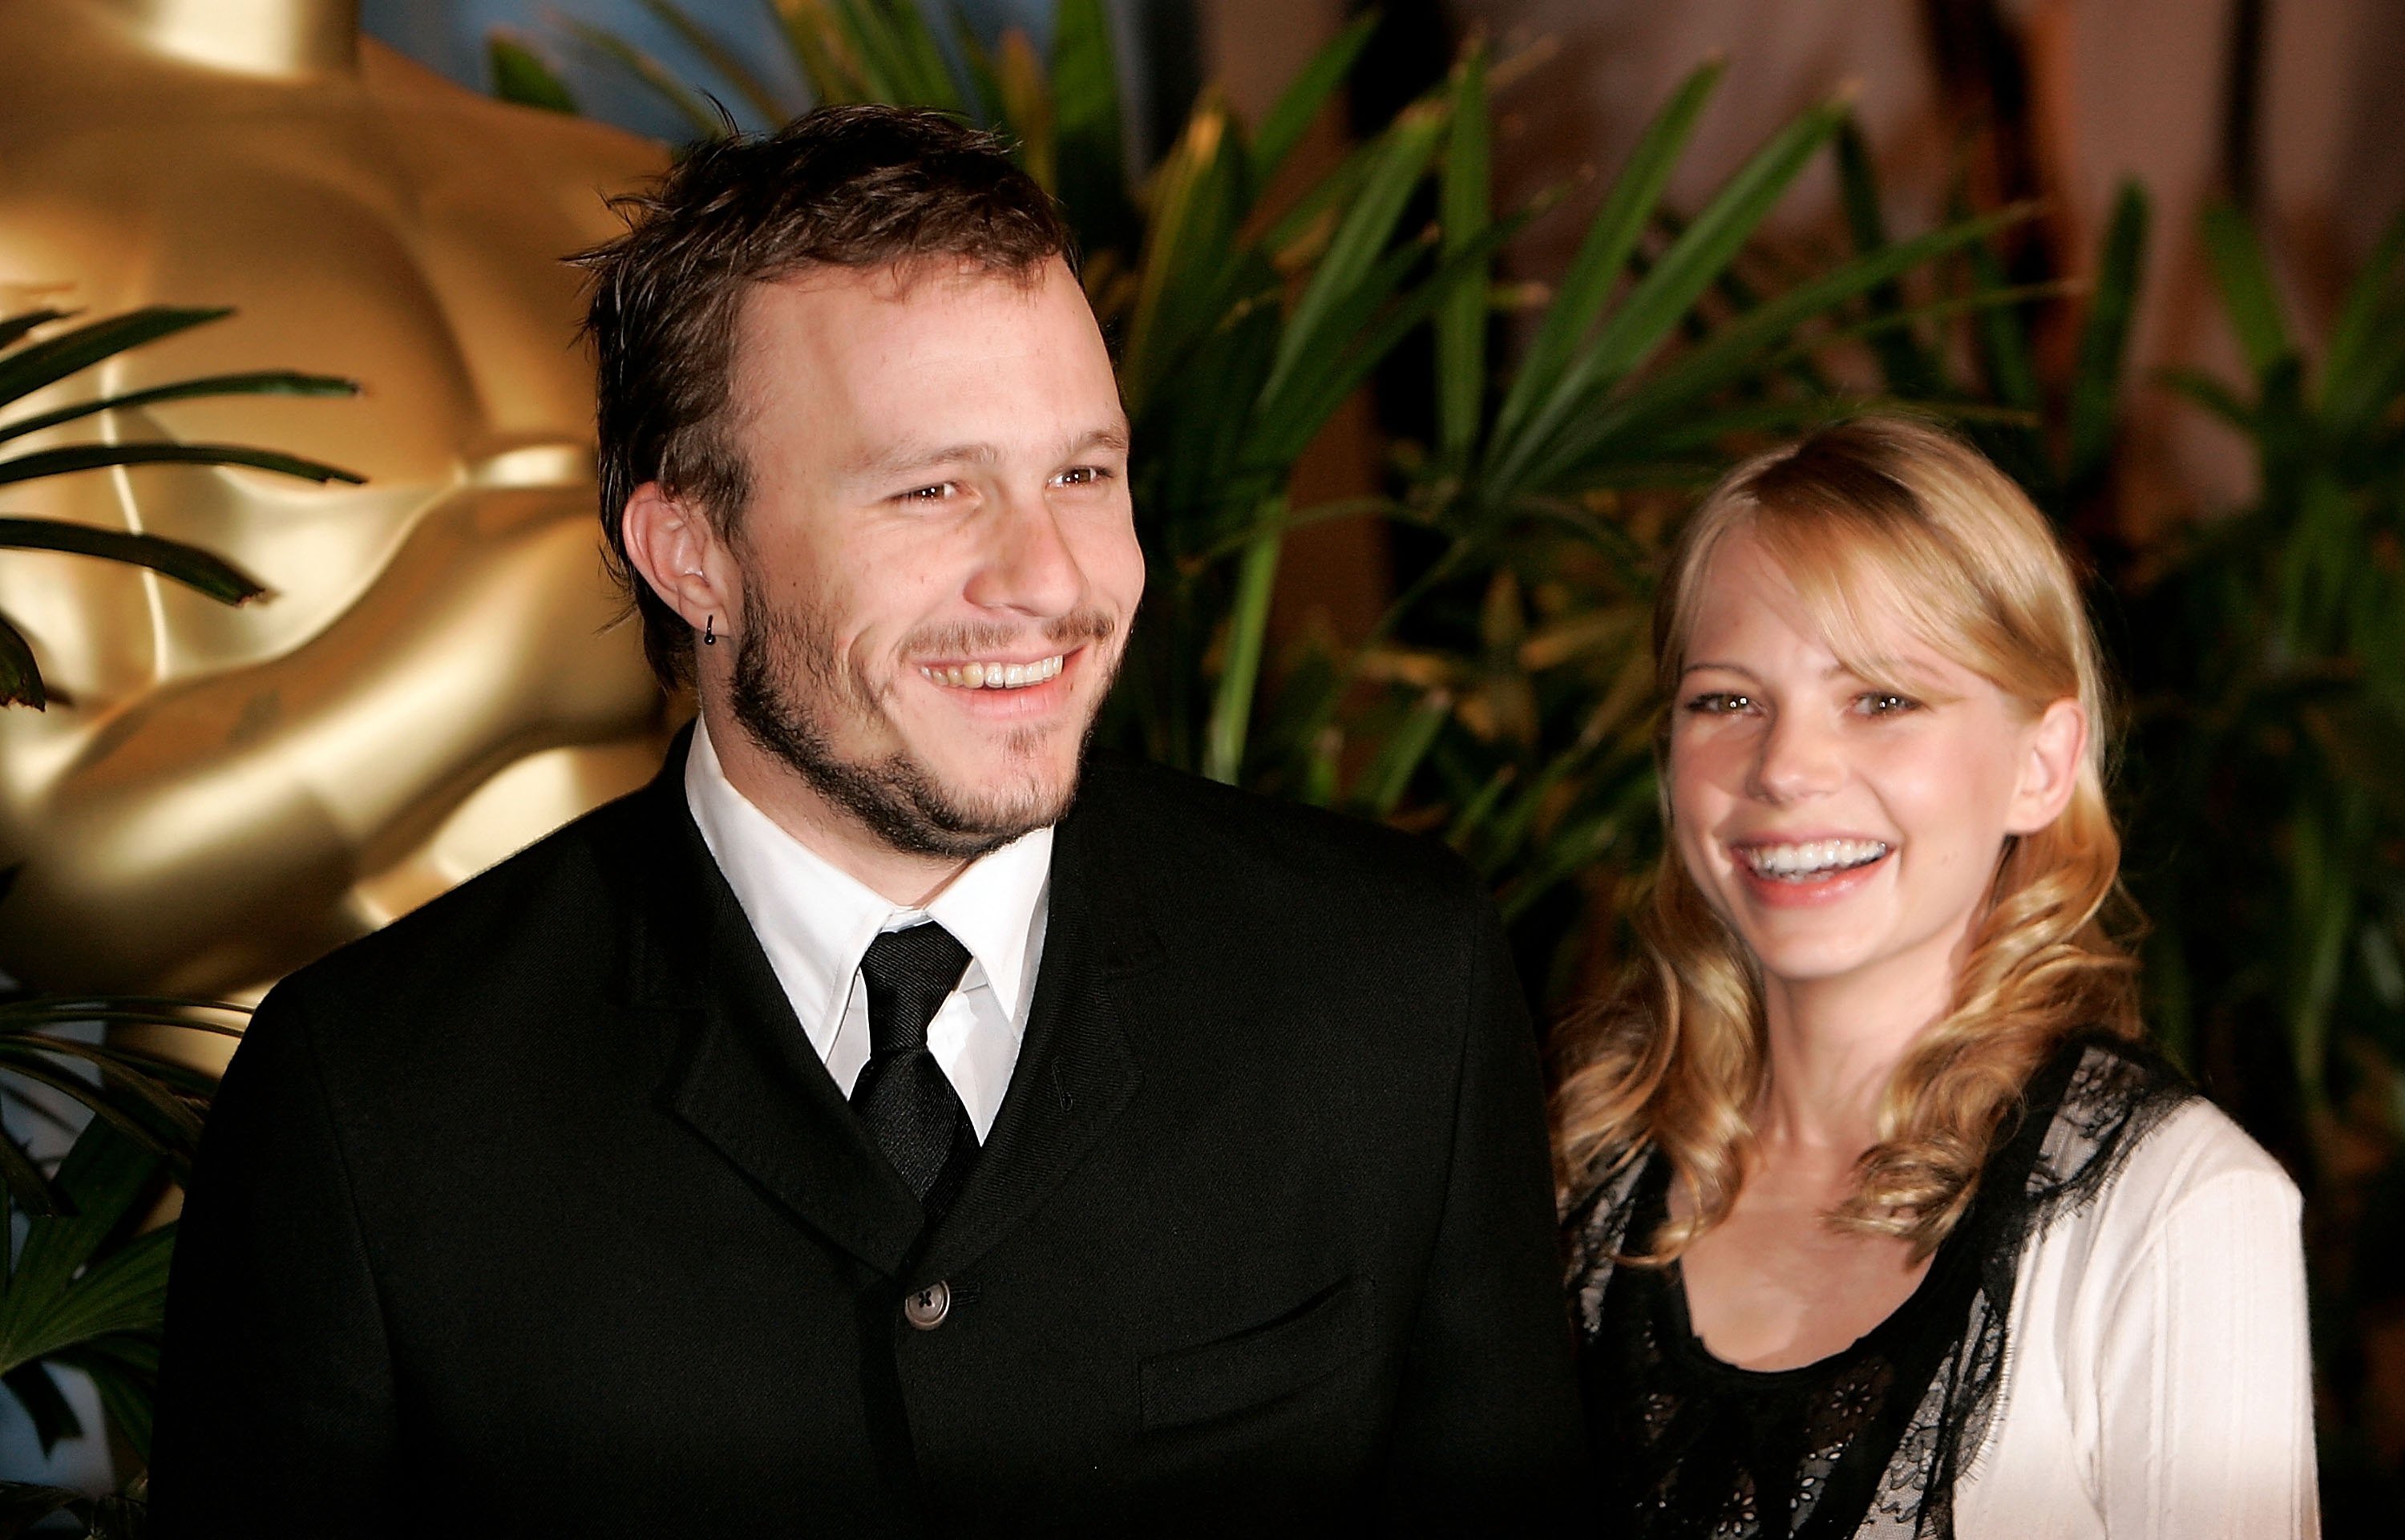 Heath Ledger and Michelle Williams in Beverly Hills in 2006. | Source: Getty Images 